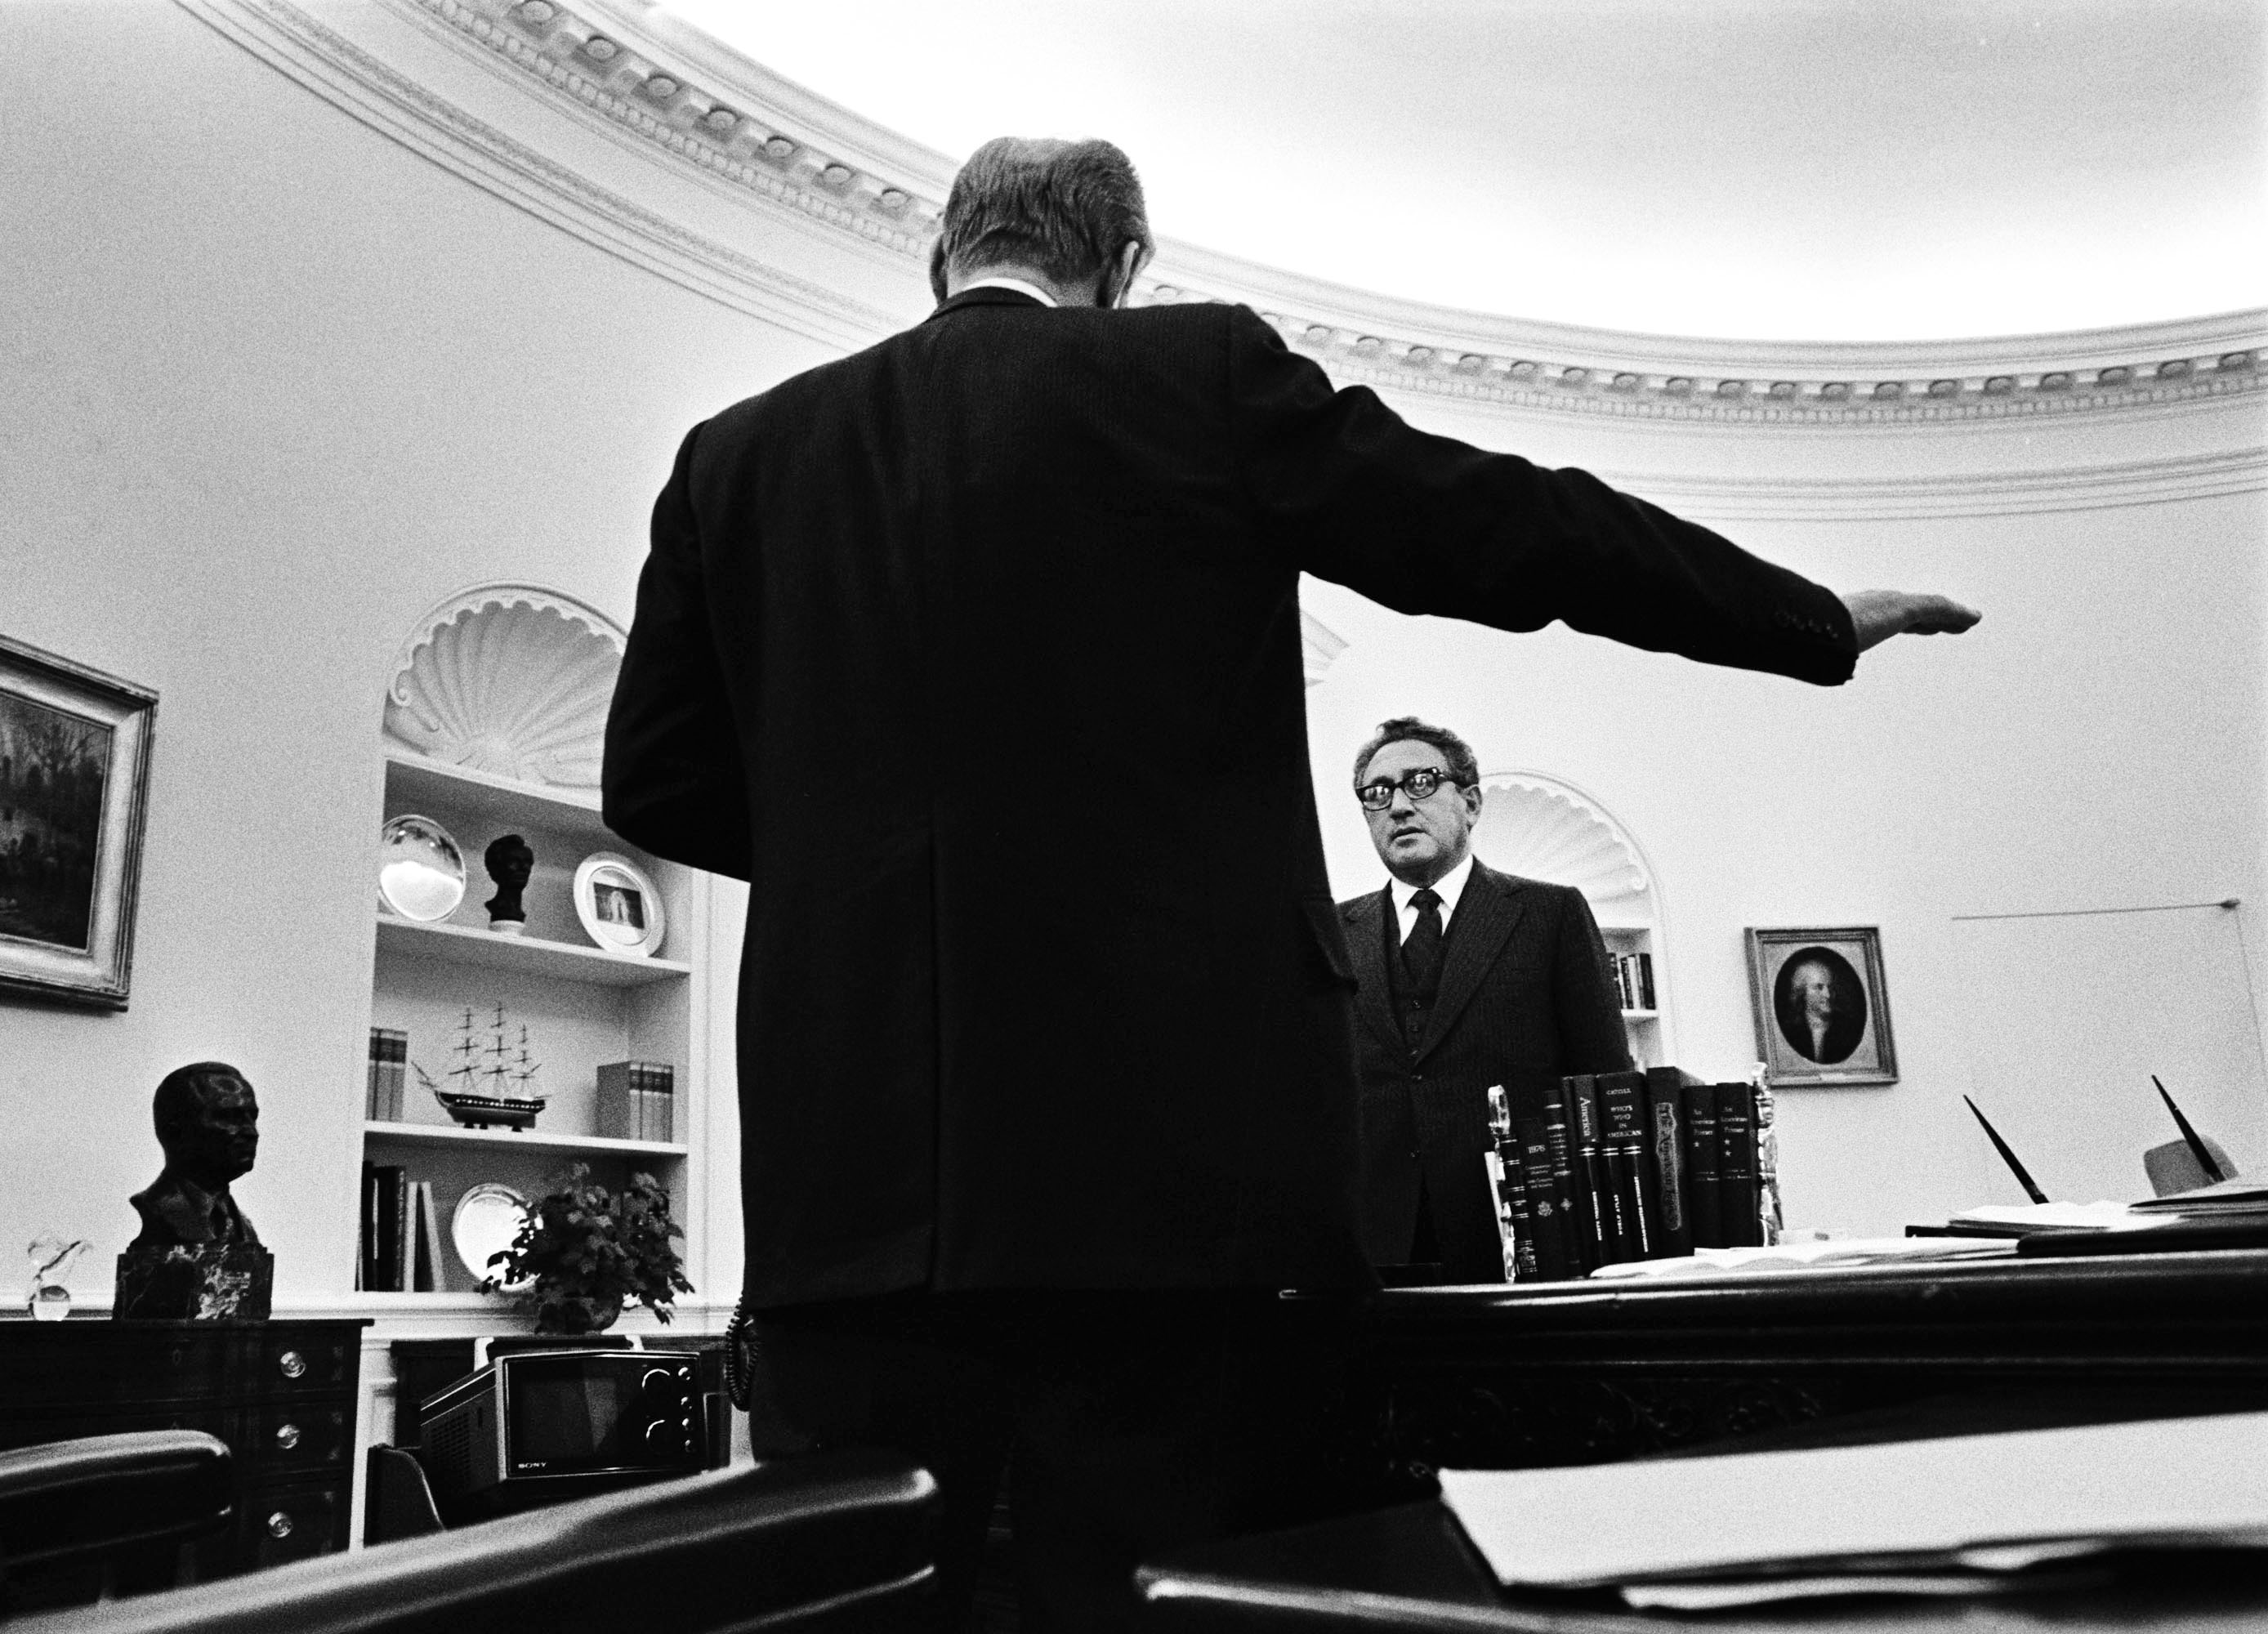 "As White House photographer I was able to be in situations off limits to other photographers, and was able to document many critical historical moments," says David Hume Kennerly, who photographed President Ford and Secretary of State Henry Kissinger discussing the ongoing negotiations on the Strategic Arms Limitation Treaty (SALT) being conducted with the Soviets on March 24, 1976. (David Hume Kennerly—Getty Images)